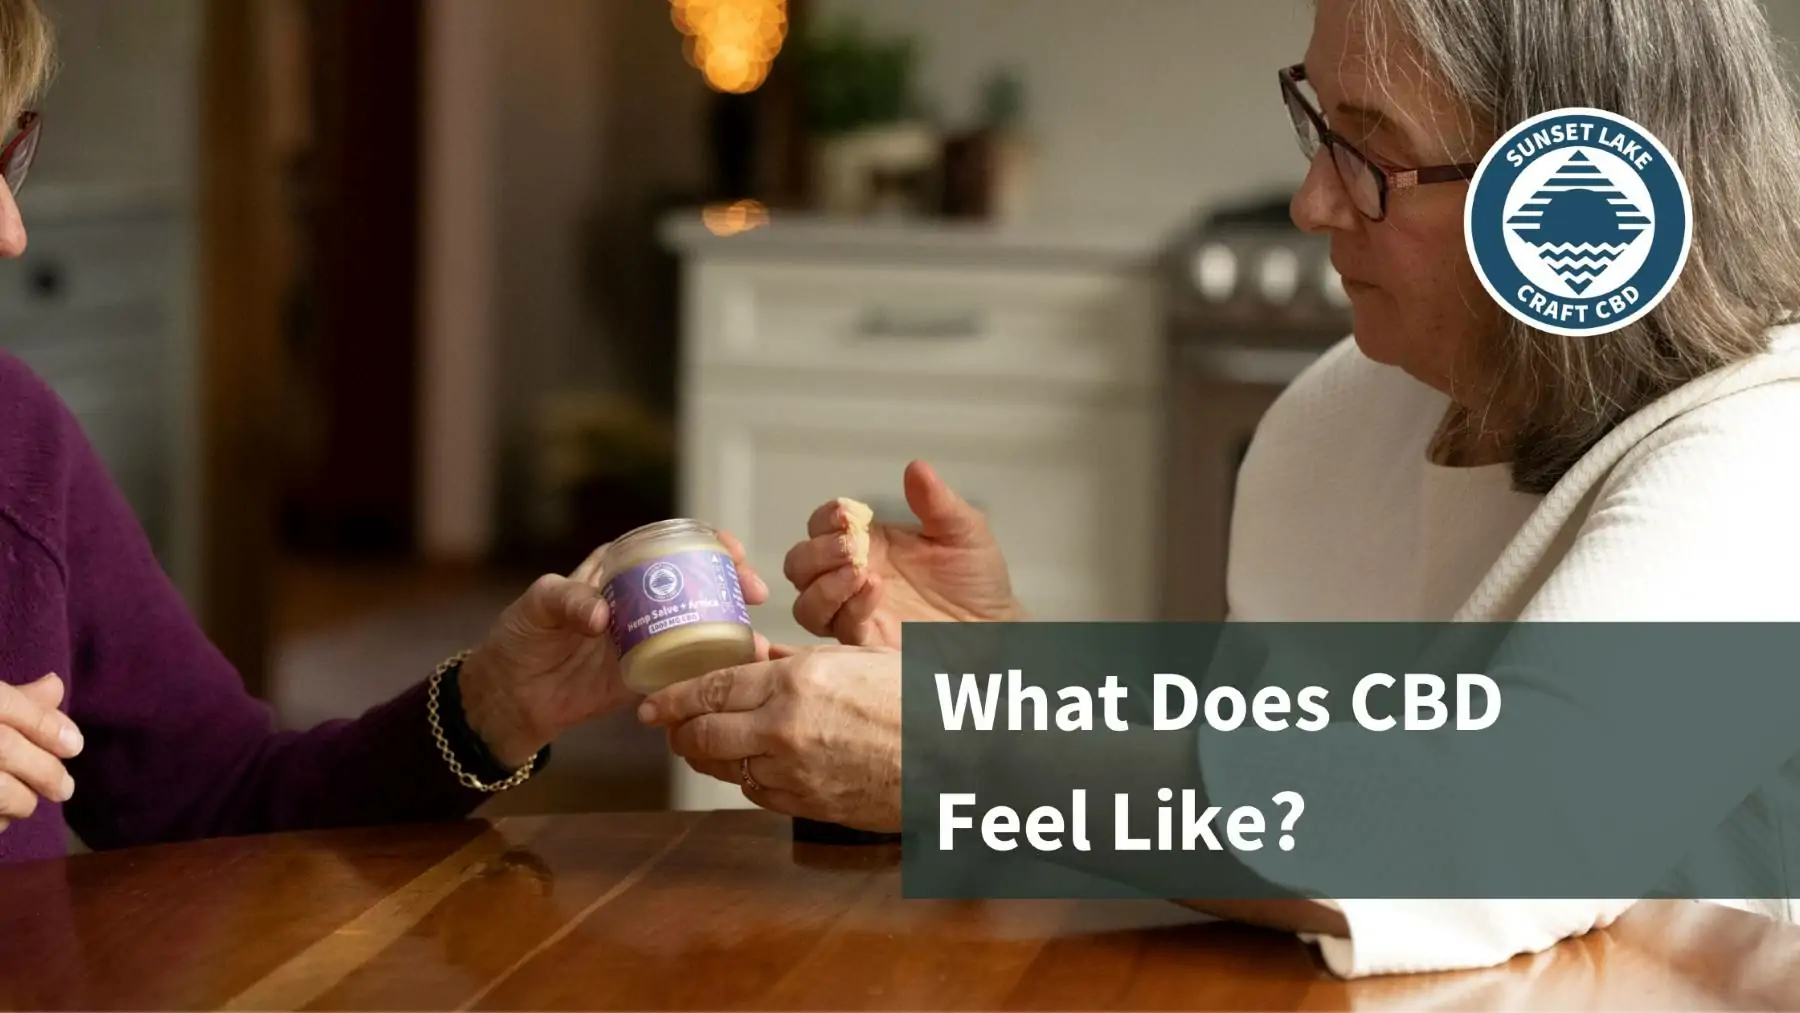 A woman applying salve. Text reads "What does CBD feel like?"